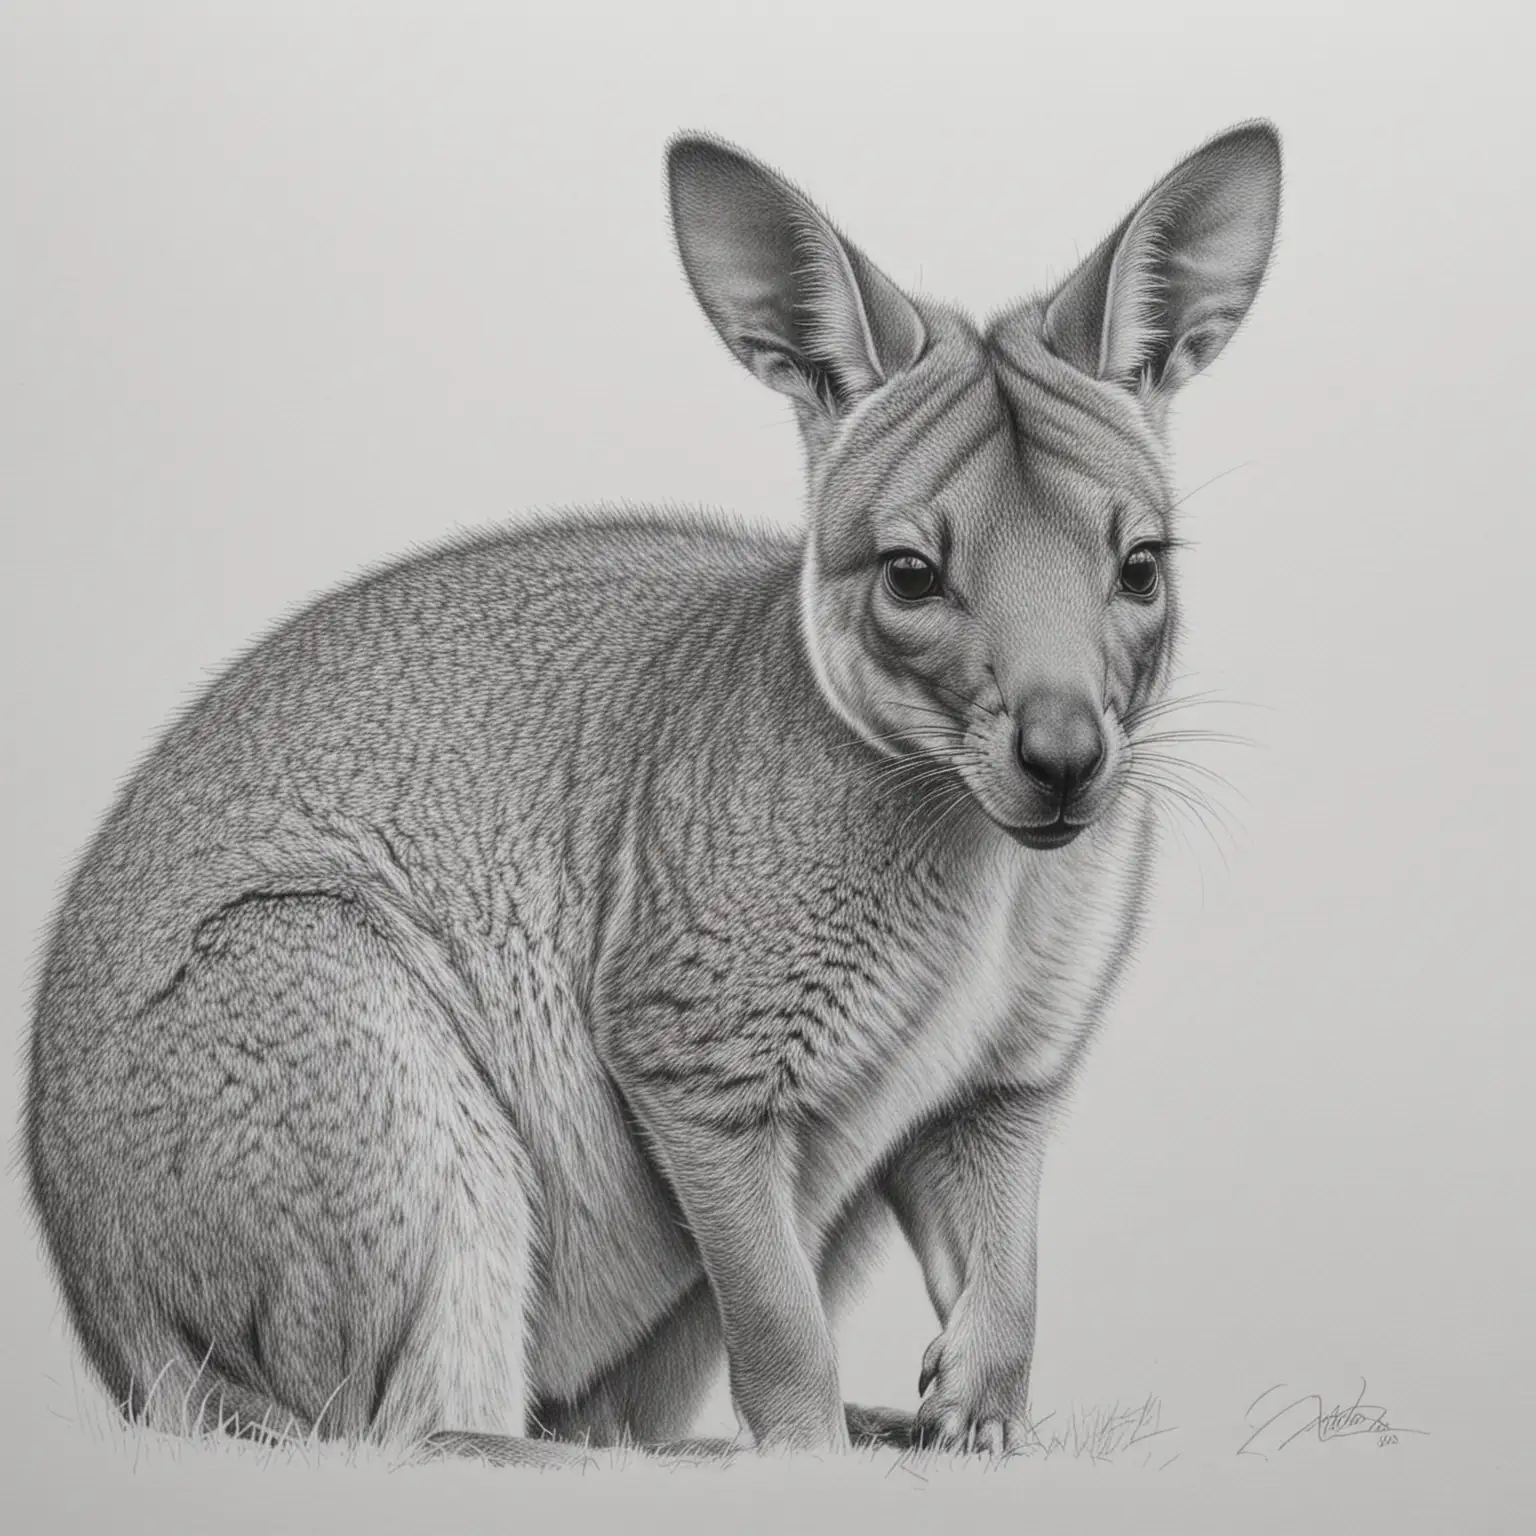 Graceful Pencil Drawing of a Wallaby in Natural Habitat